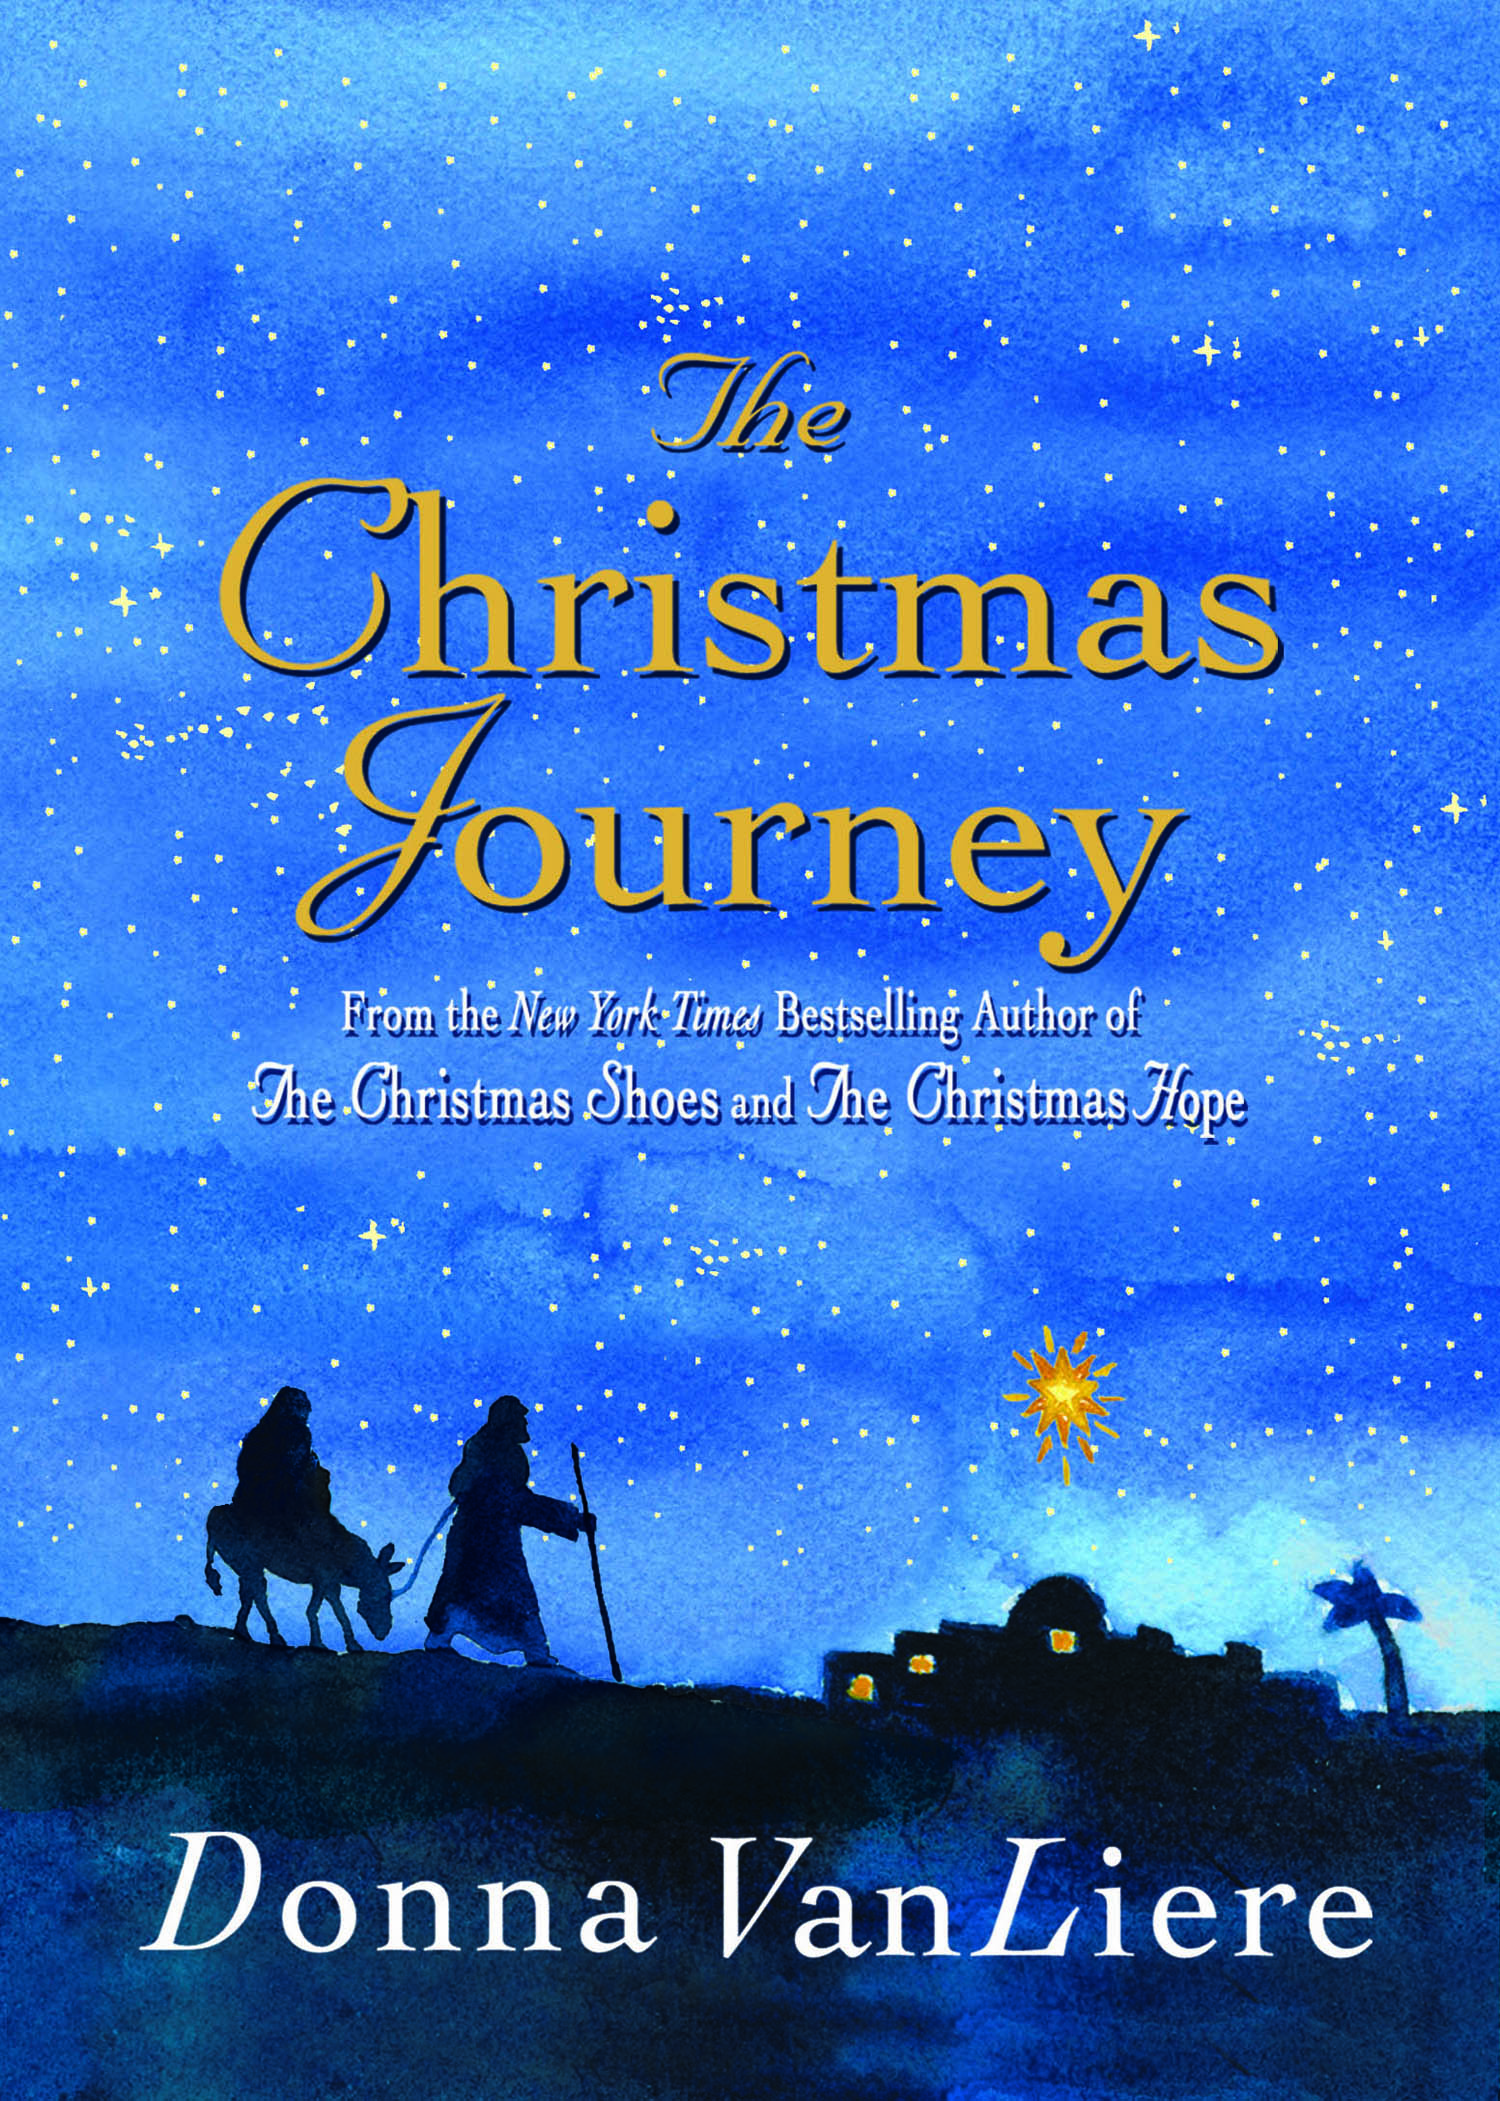 Mile journey. One Christmas Journey book.